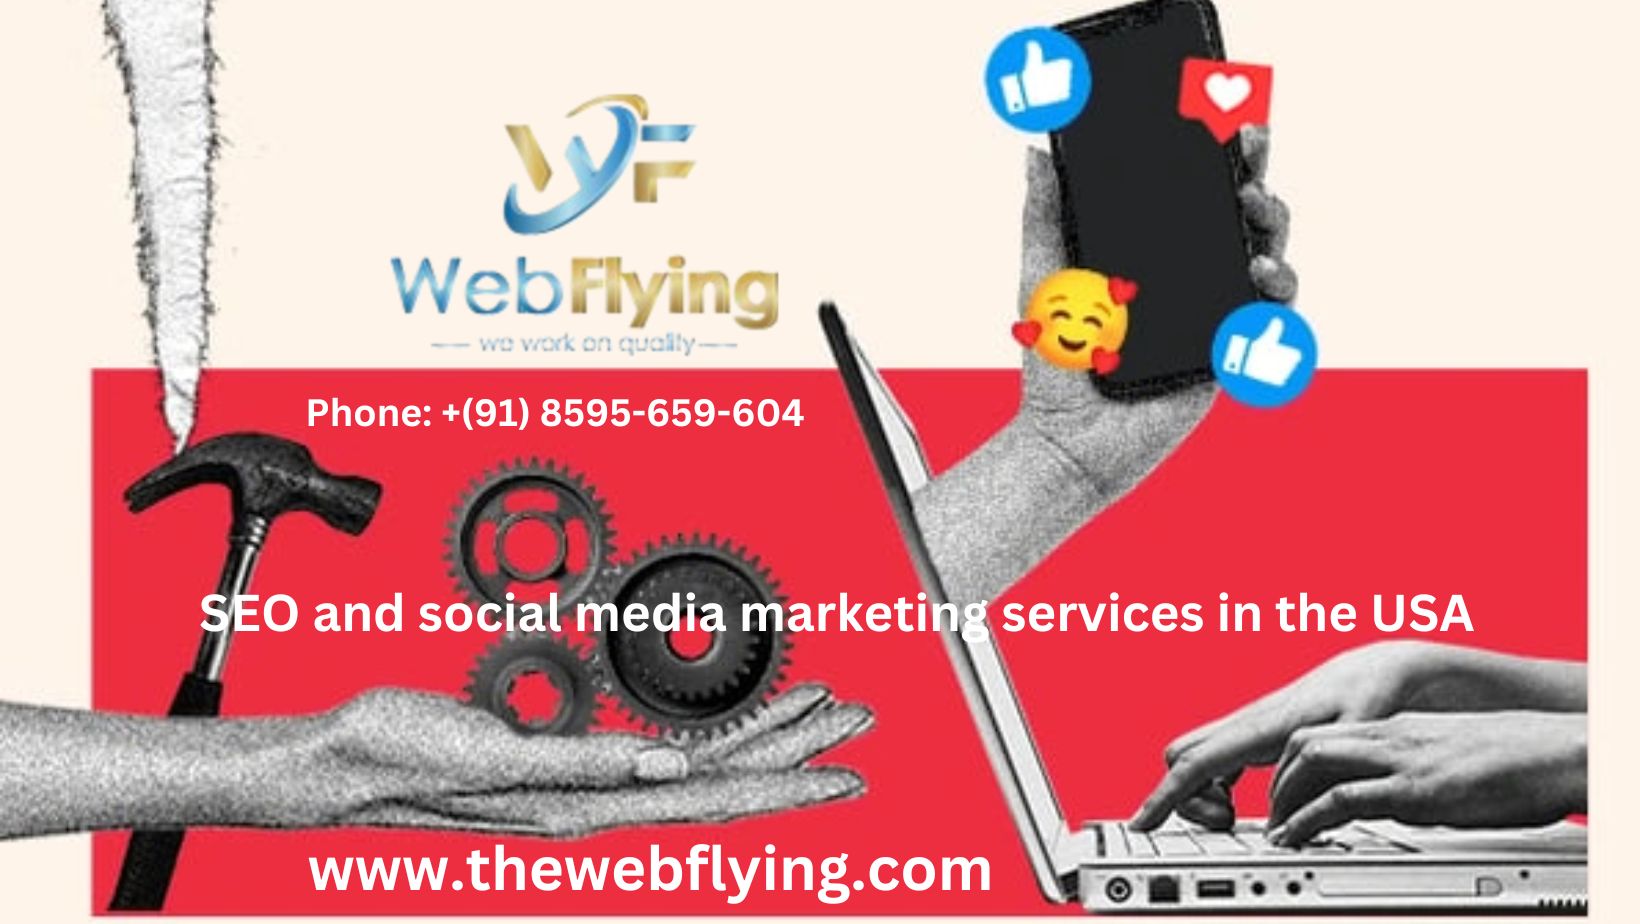 SEO and social media marketing services in the USA